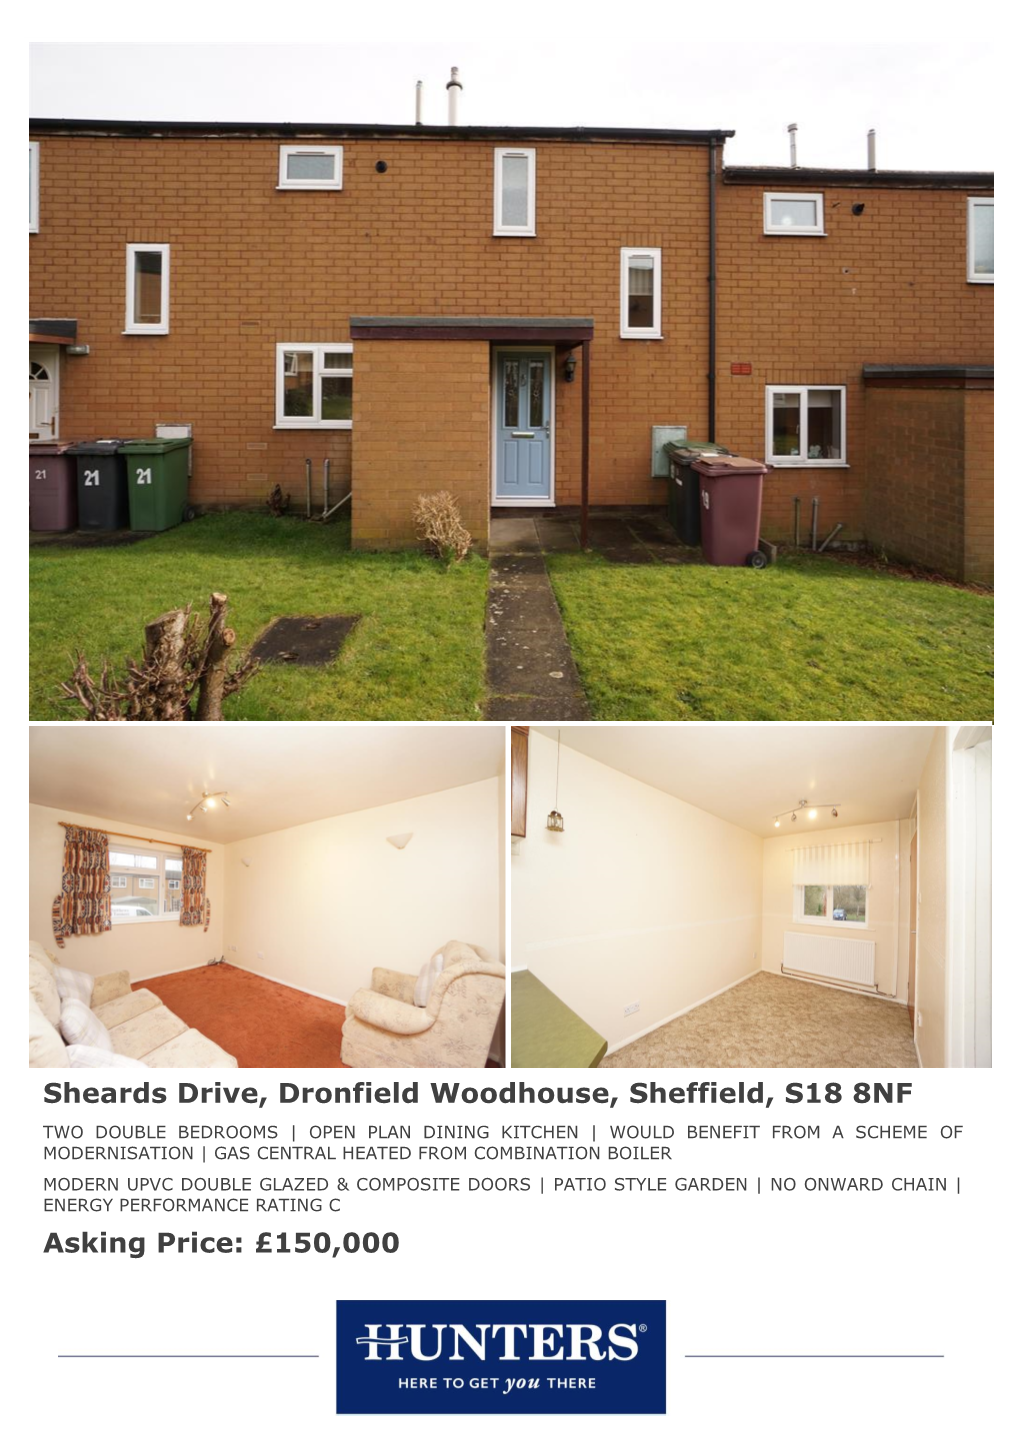 Sheards Drive, Dronfield Woodhouse, Sheffield, S18 8NF Asking Price